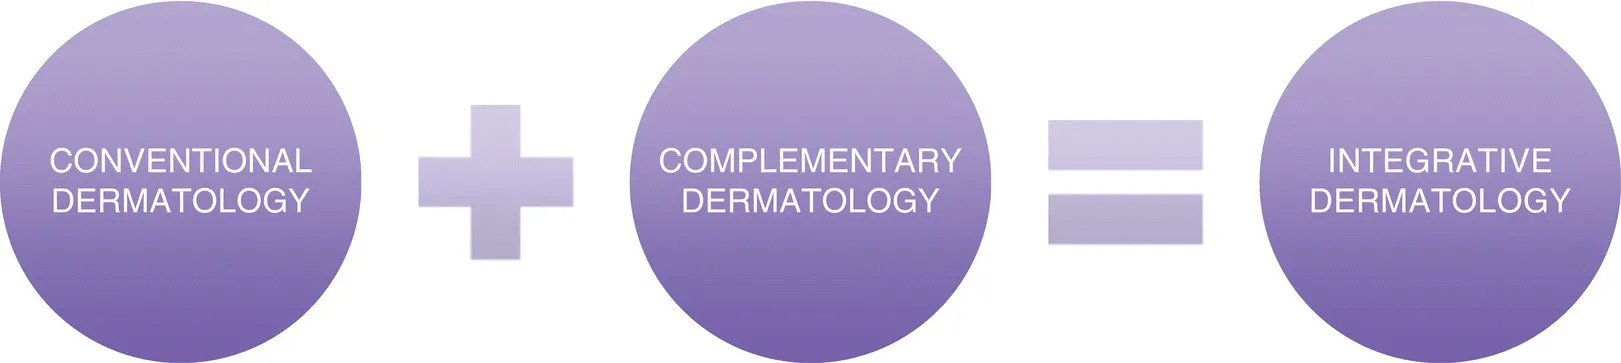 A circle labeled conventional dermatology added to a circle labeled complementary dermatology equal to a circle labeled integrative dermatology.